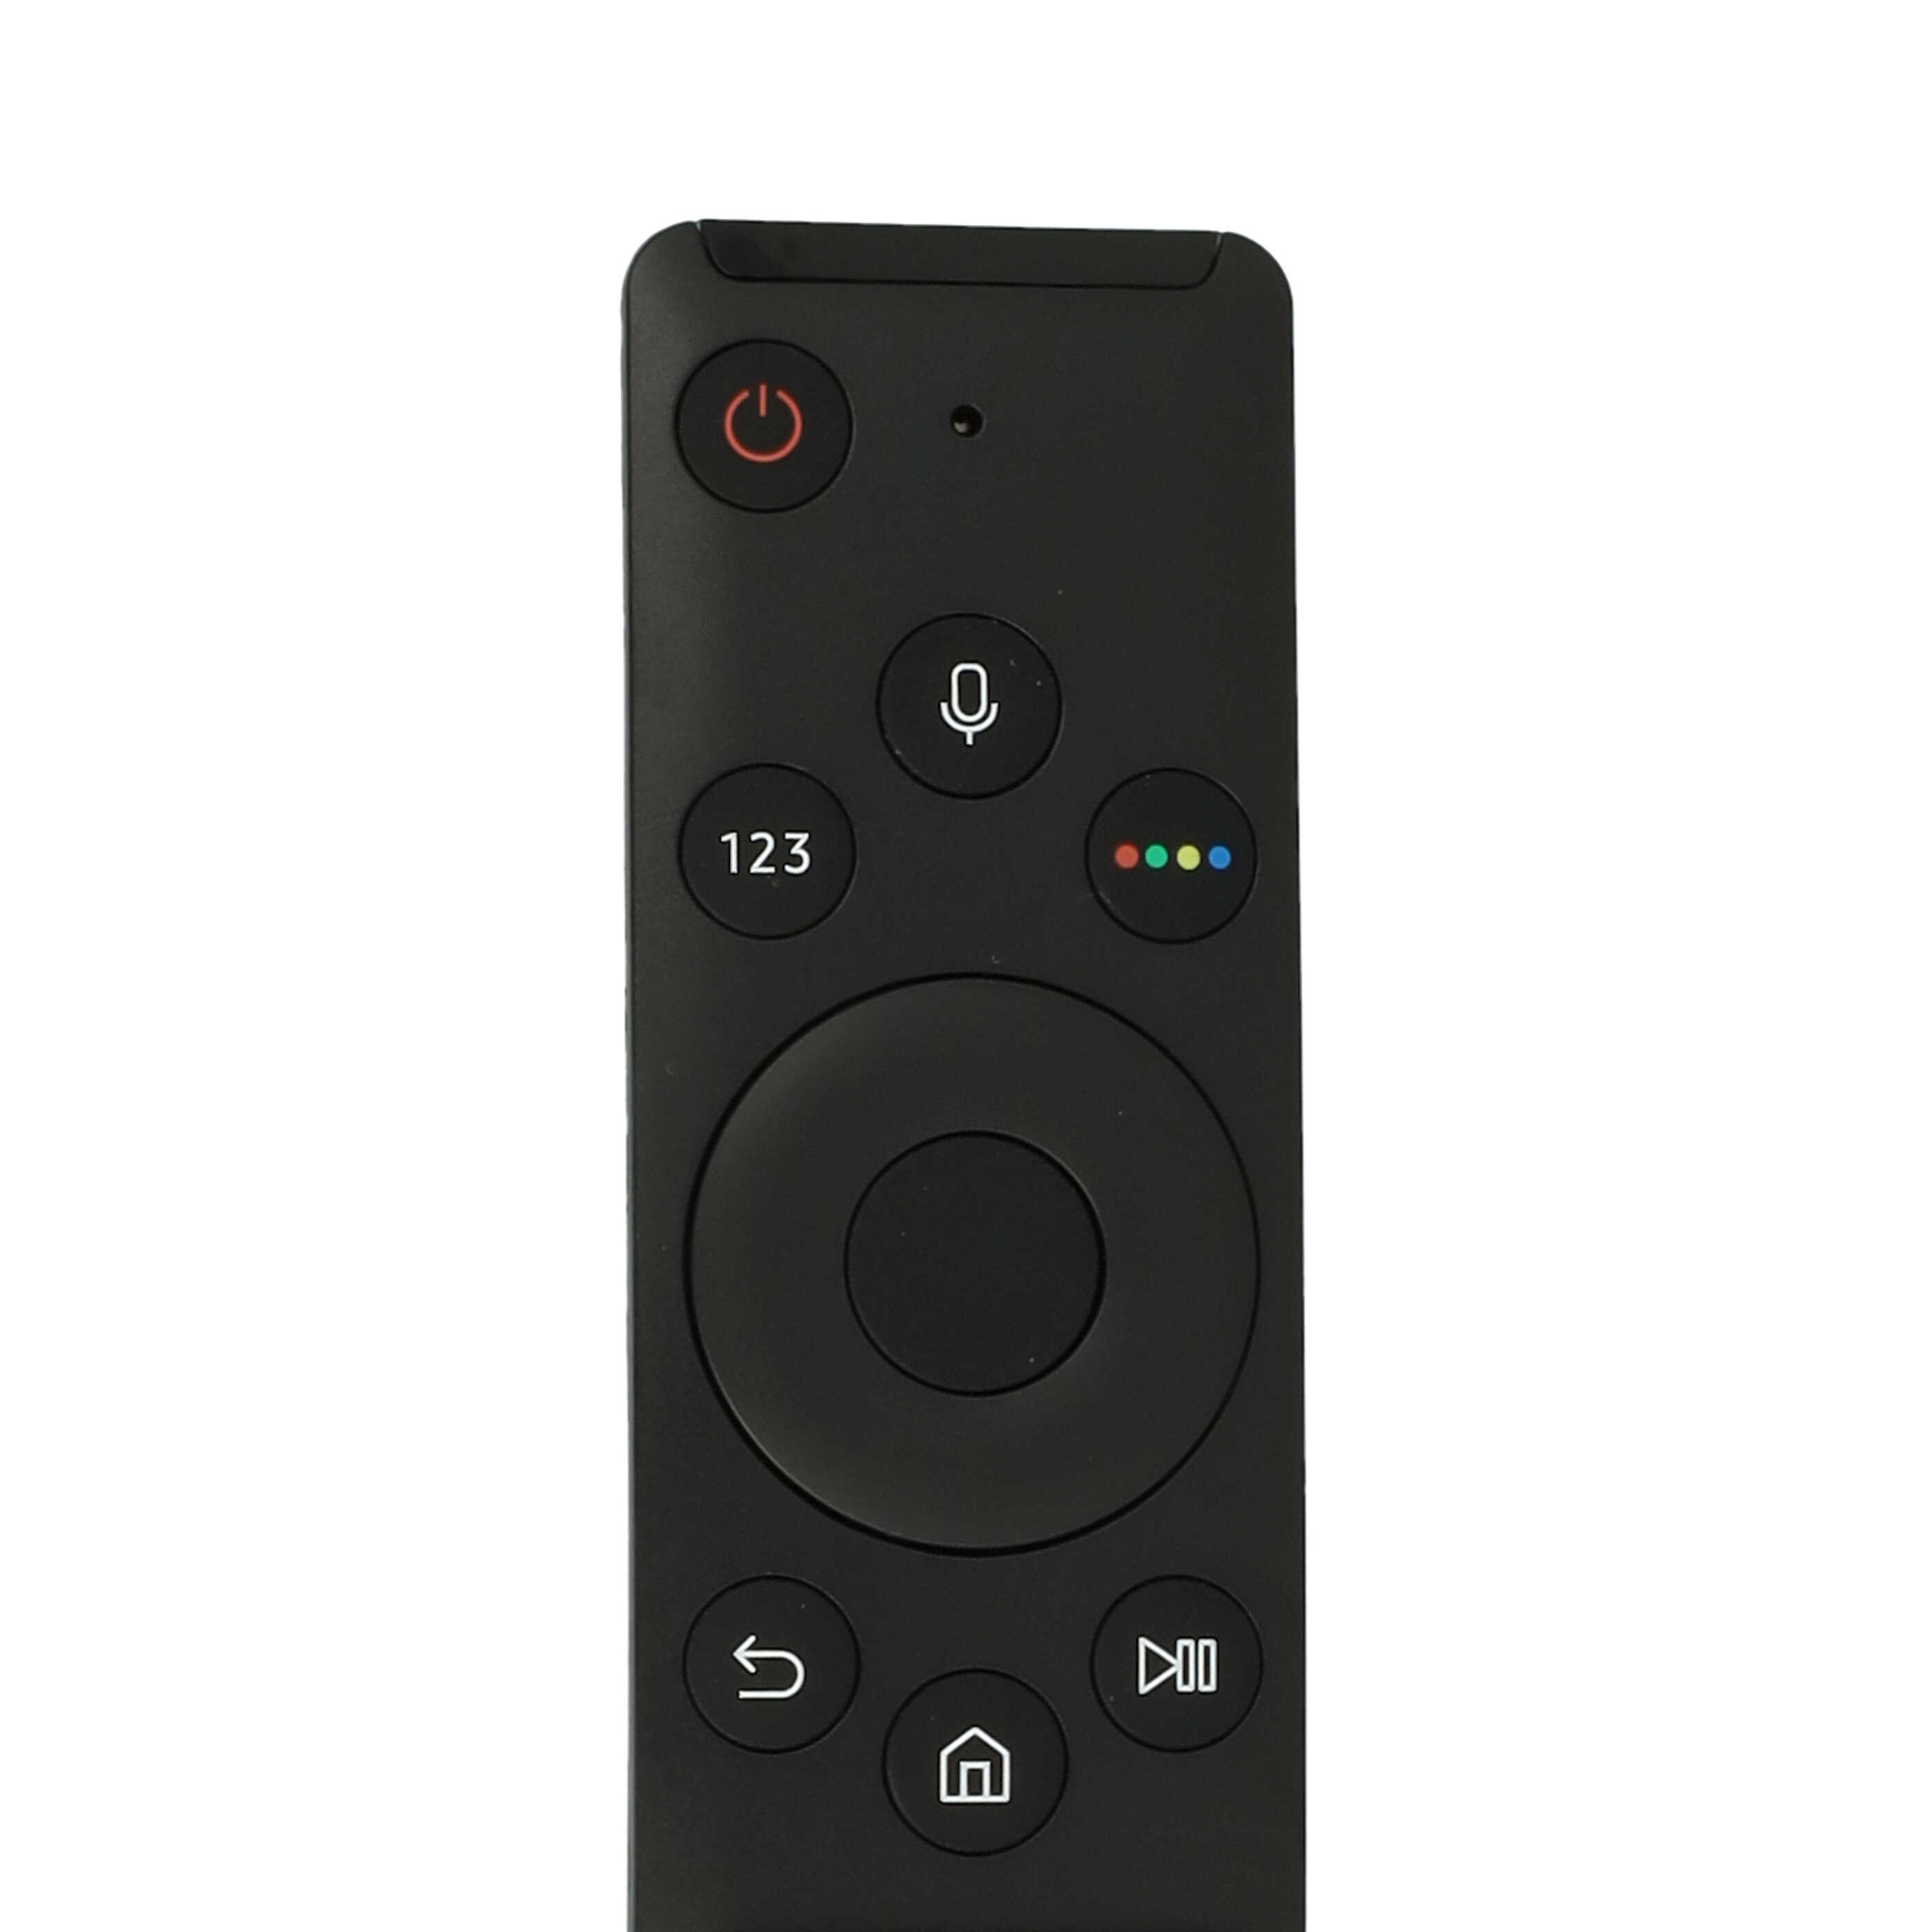 Remote Control replaces Samsung BN59-01298D, BN59-01298C for Samsung TV